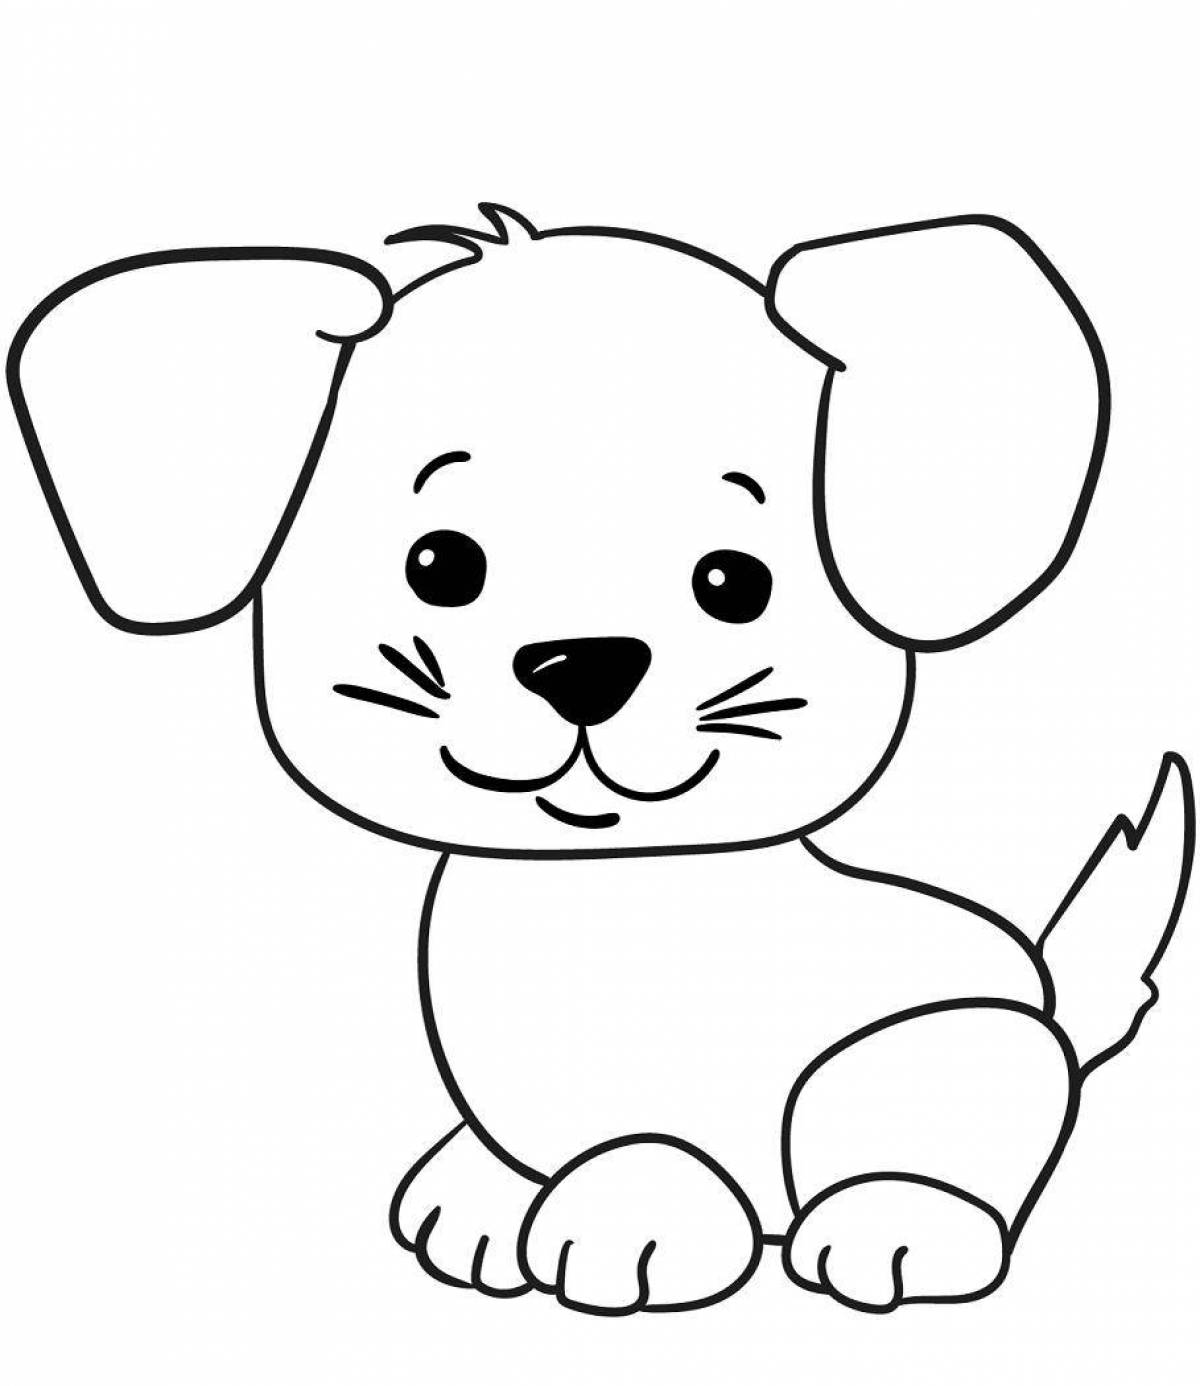 Puppy drawing #1